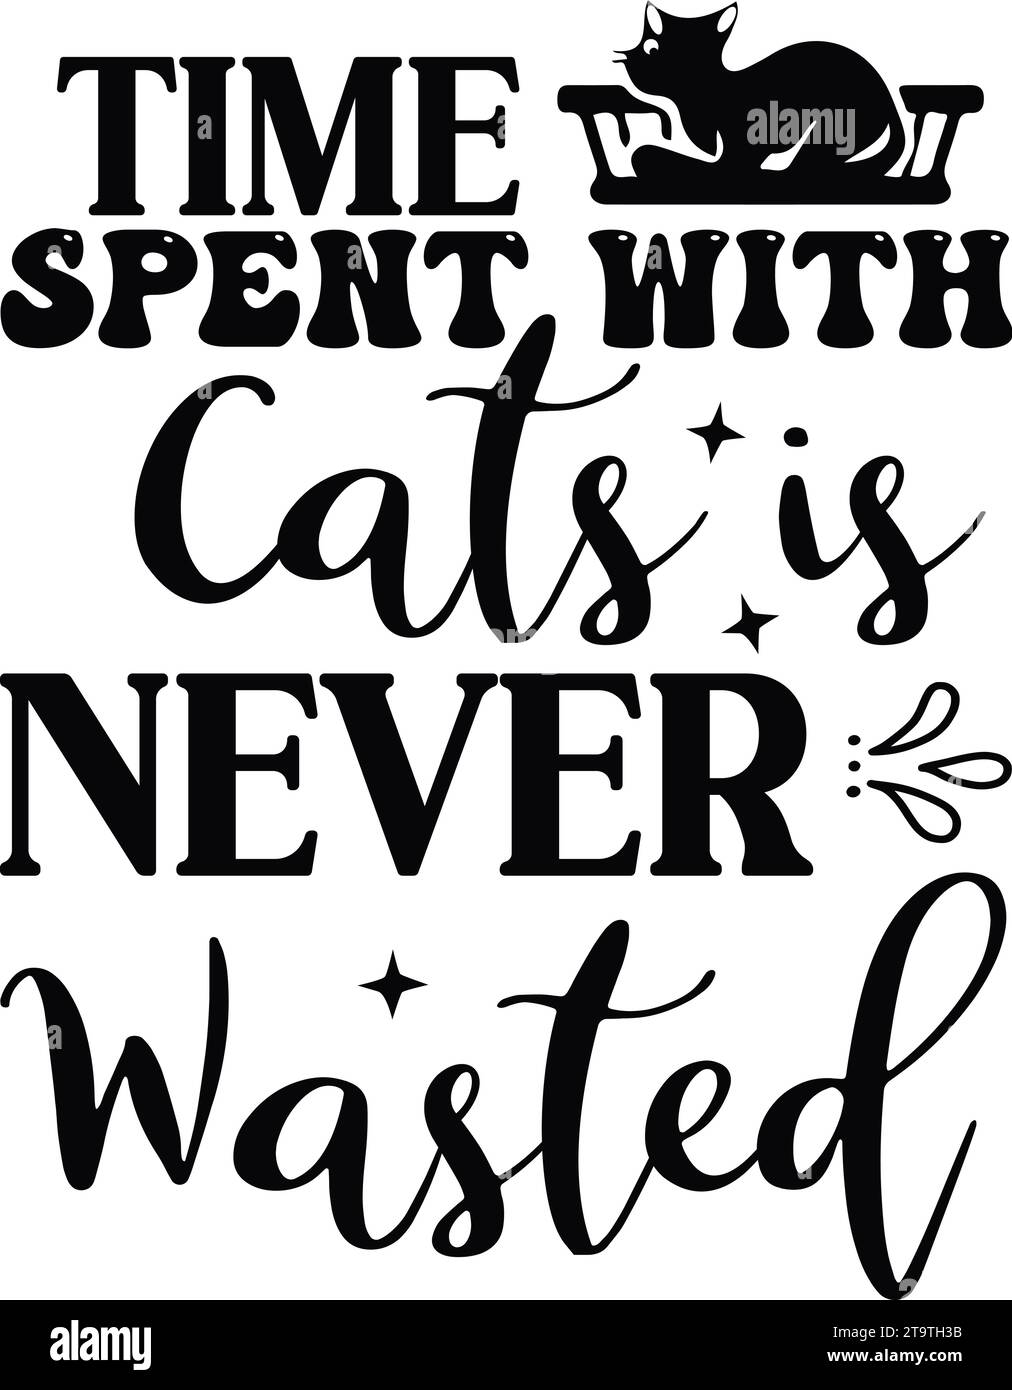 Time Spent with Cats is Never Wasted Stock Vector